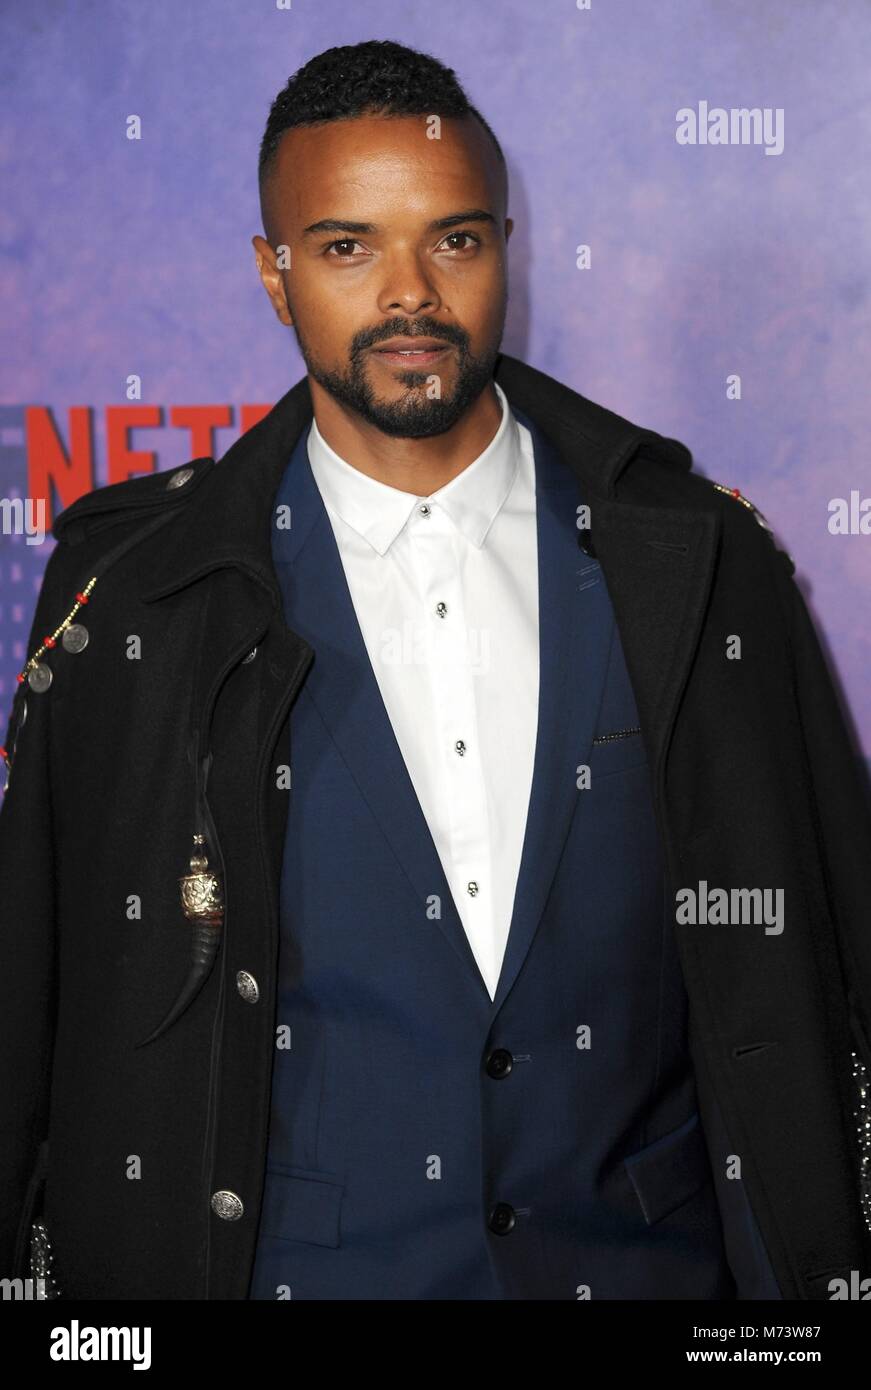 Eka Darville at arrivals for MARVEL’S JESSICA JONES Season 2 Premiere, AMC Loews Lincoln Square, New York, NY March 7, 2018. Photo By: Kristin Callahan/Everett Collection Stock Photo